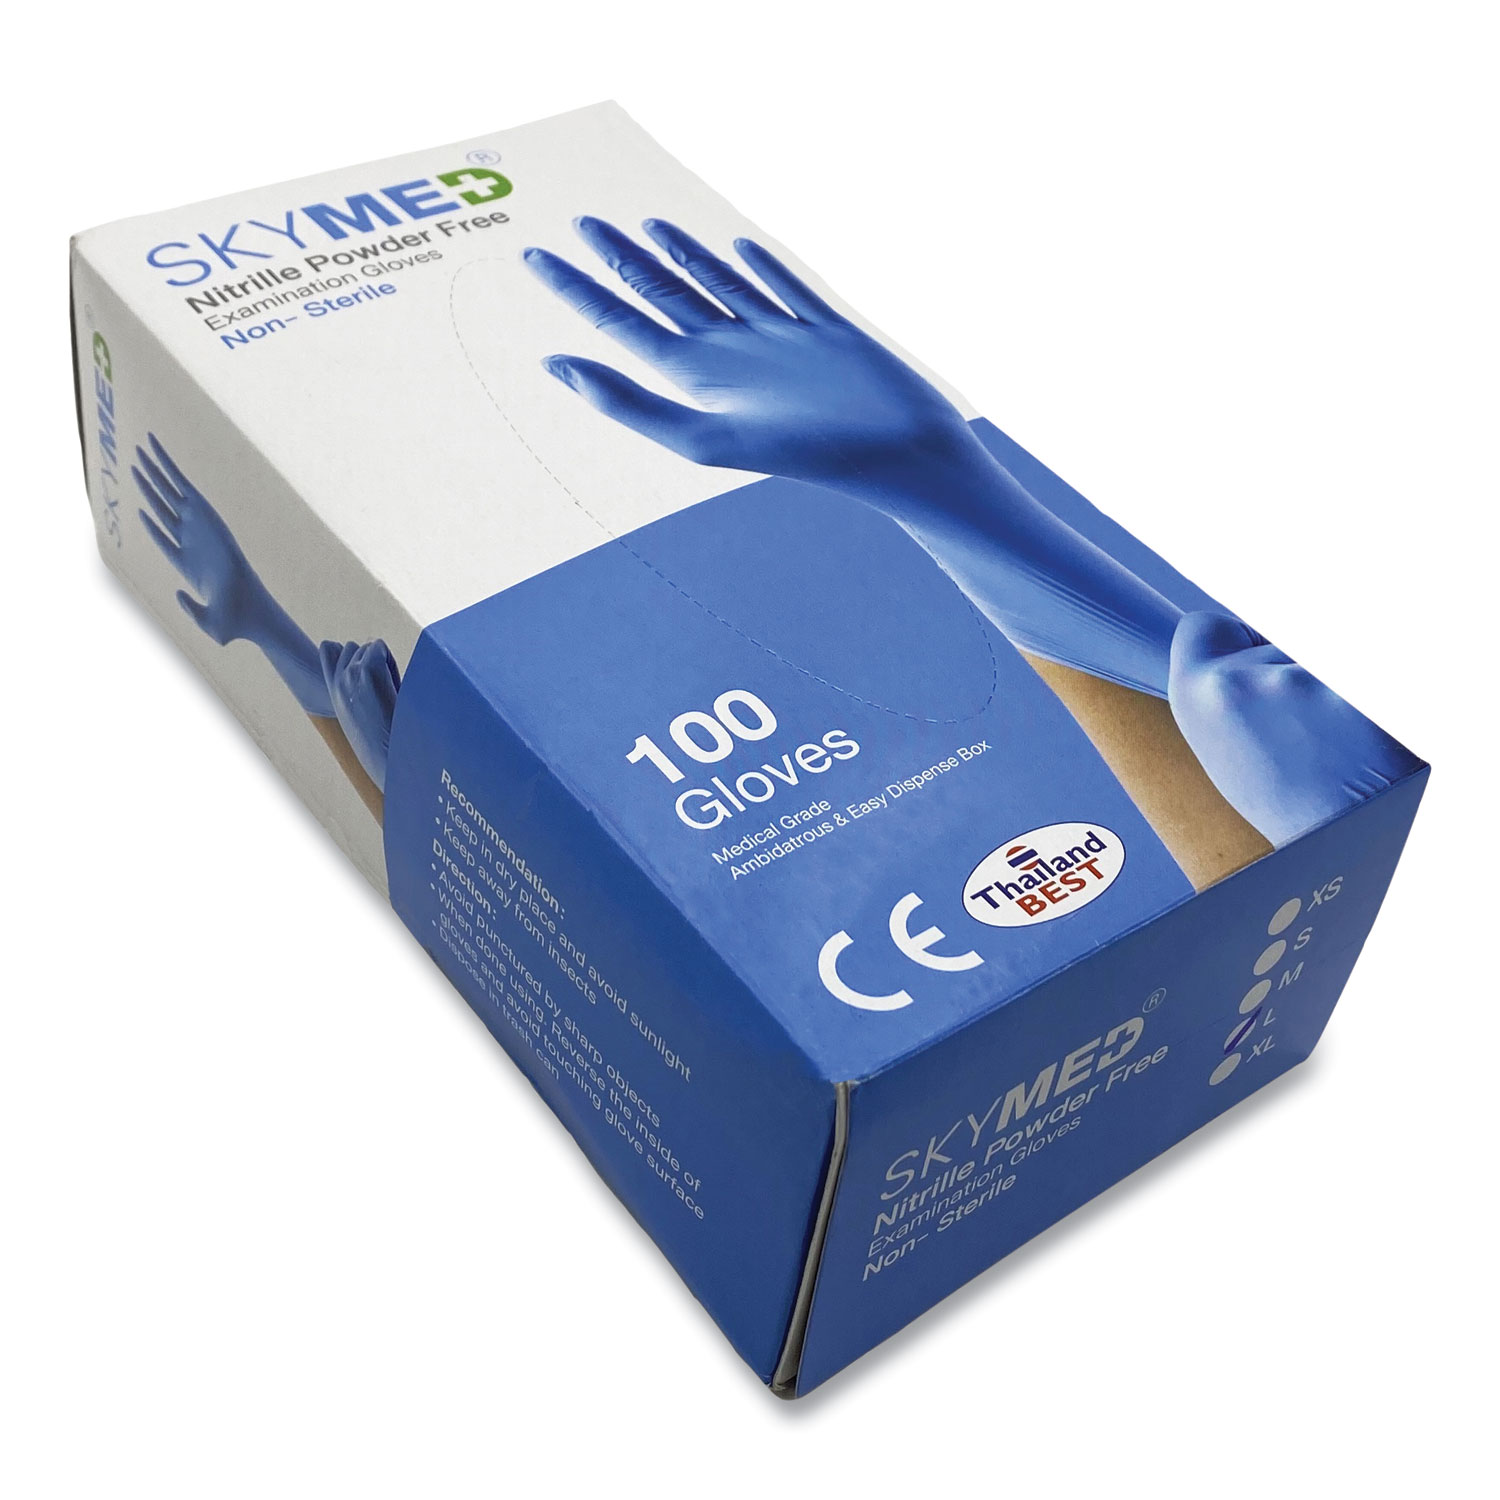  Skymed CNG-100/0911S Nitrile Gloves, Blue, Small, 100/Box, 10 Boxes/Carton (NMDCNG1000911S) 